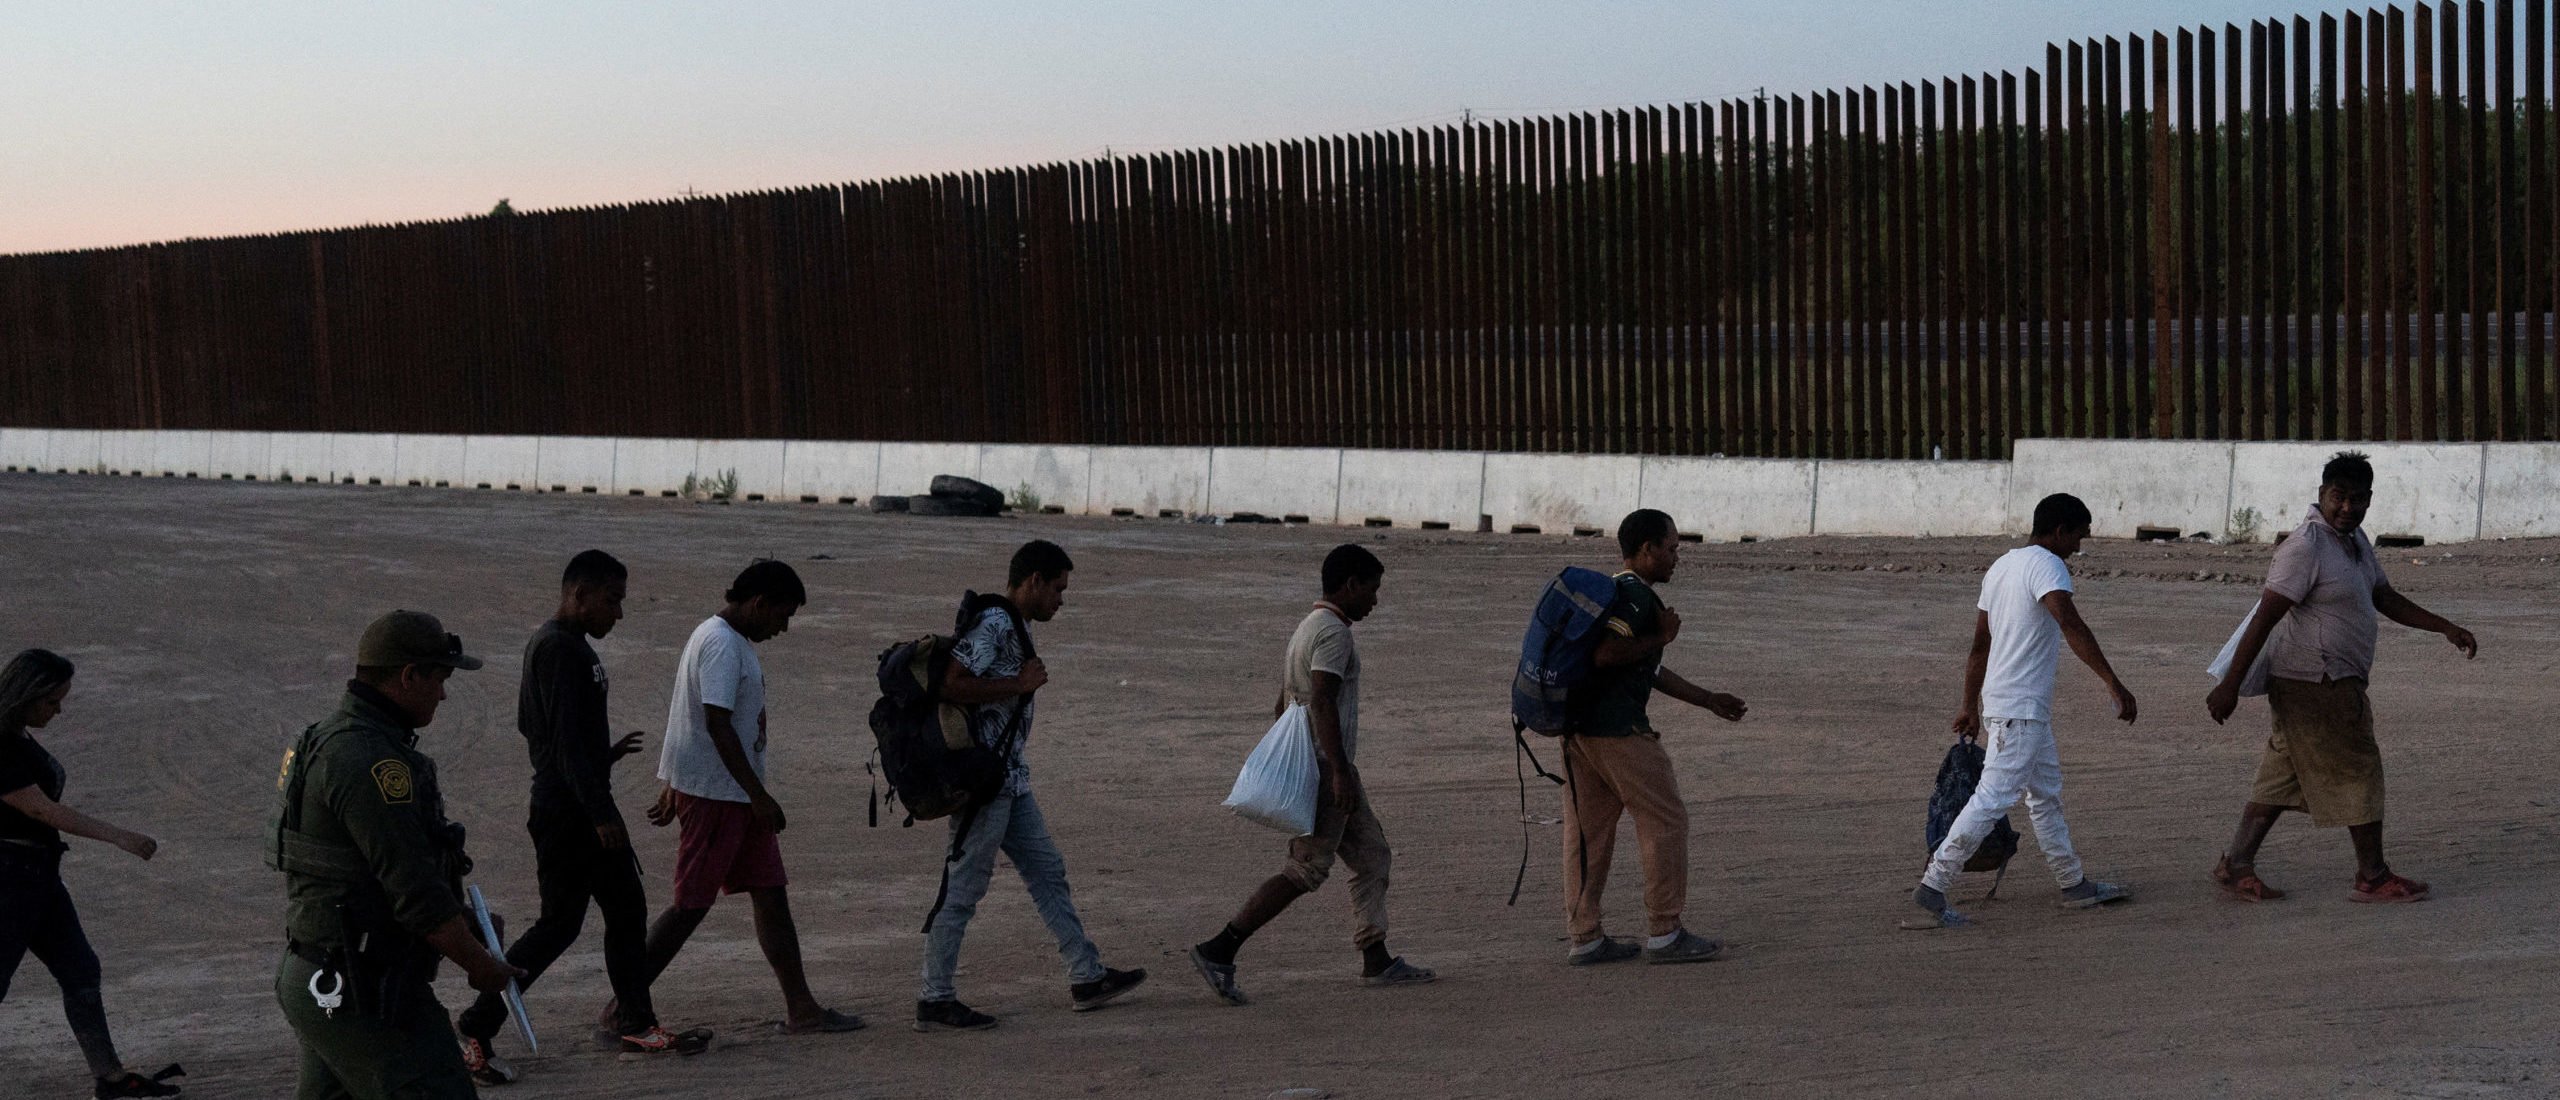 Asylum seeking migrants walk as they are transported by U.S. Customs and Border Protection agents, after crossing Rio Grande river into the U.S. from Mexico, at Eagle Pass, Texas, U.S., July 26, 2022.